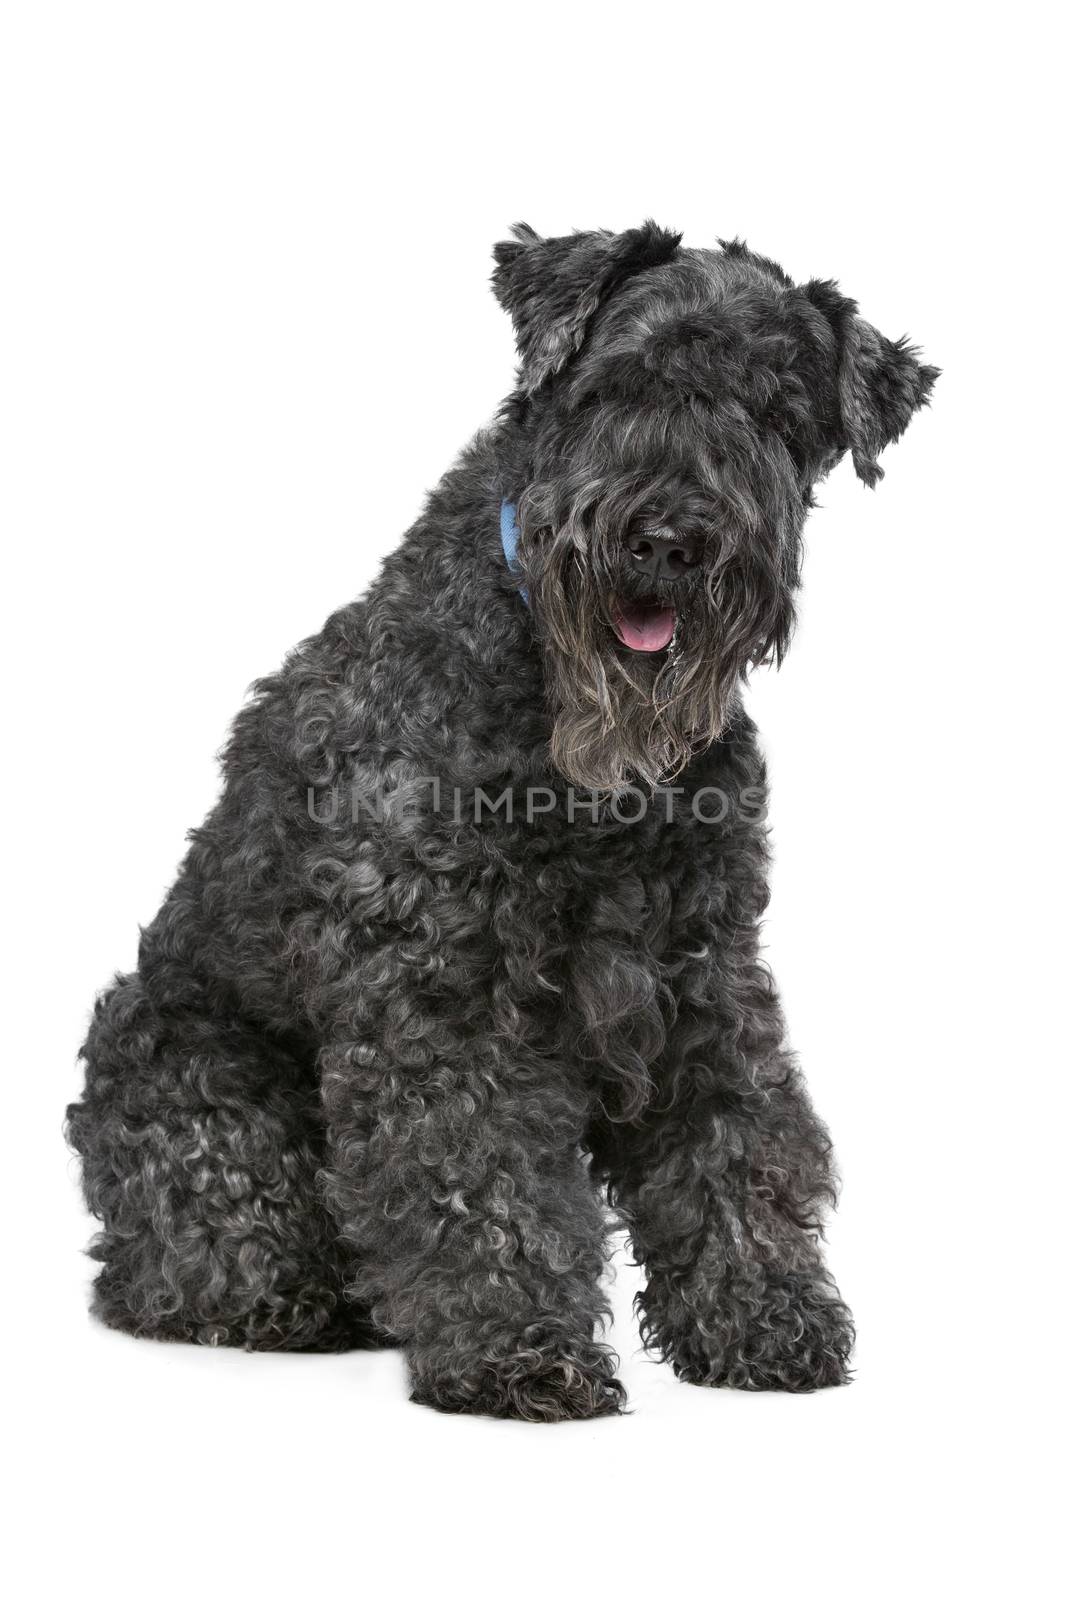 Eight year old Kerry Blue Terrier sitting in front of a white background